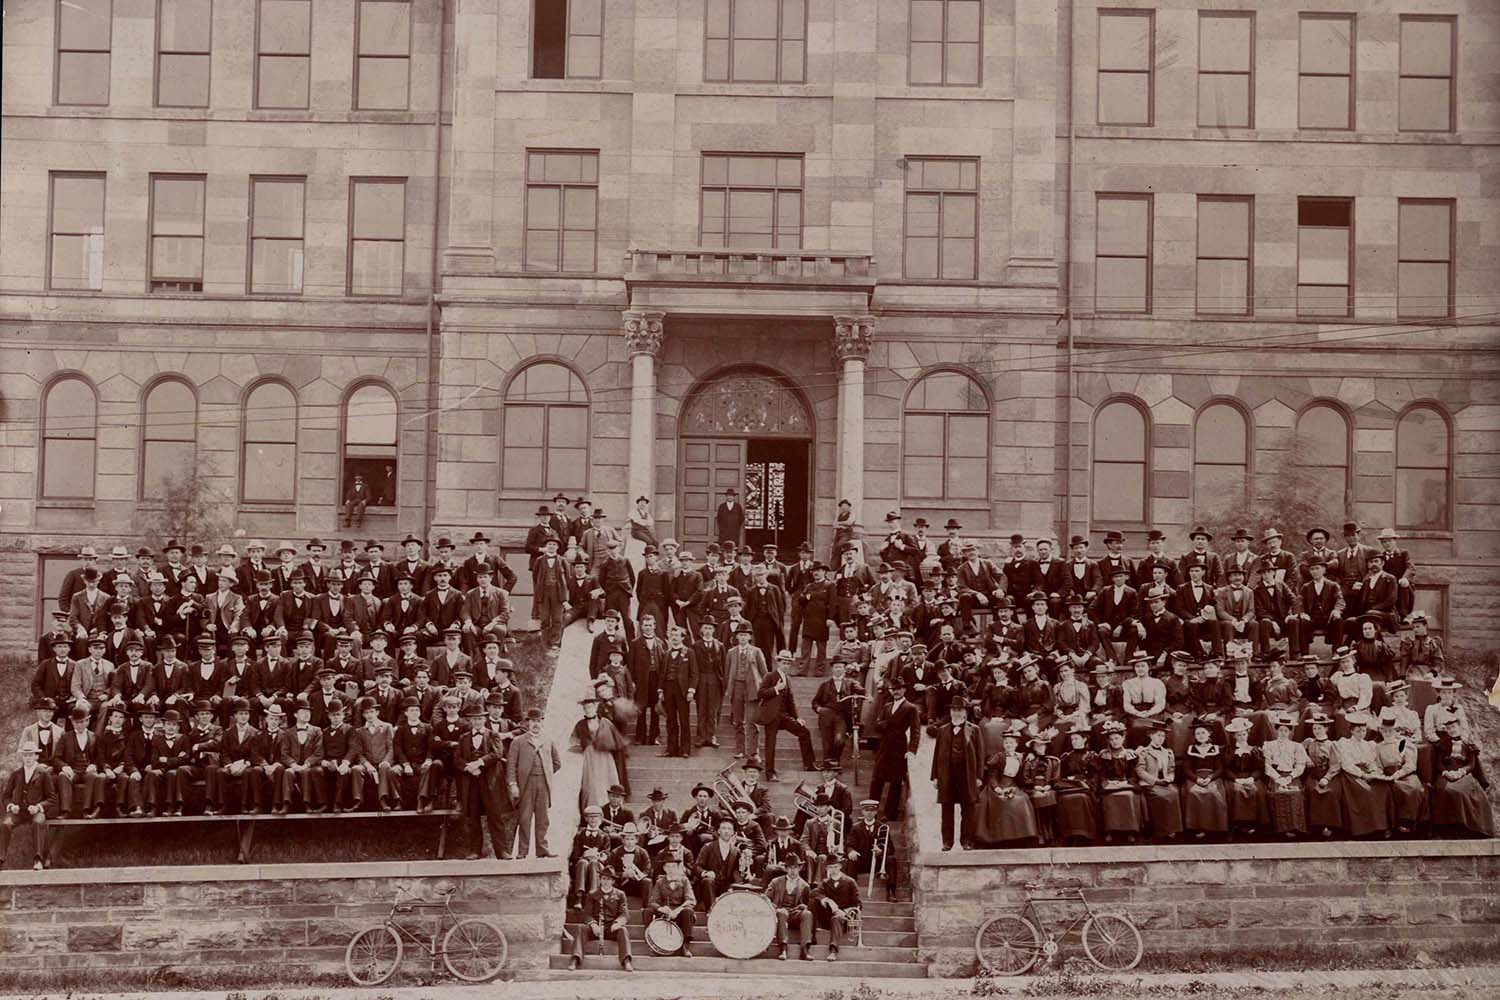 365-app-Ͷע*ֱ Band outside Old Main in the 1890s